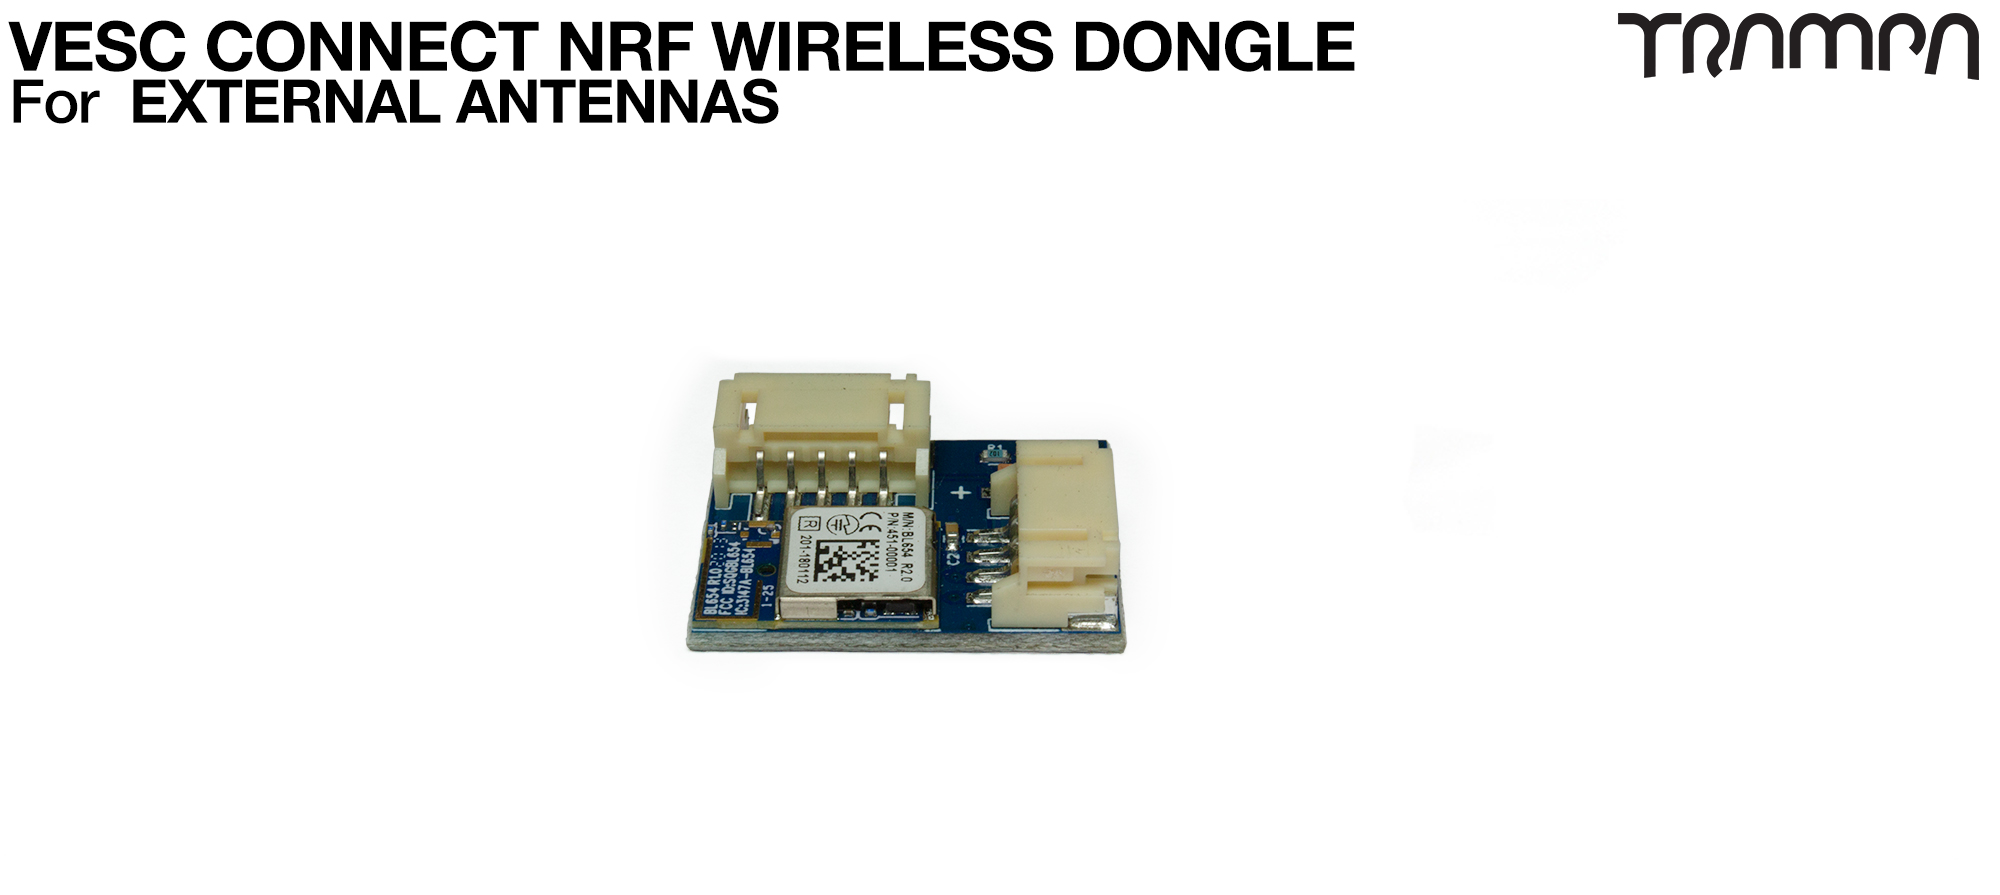 VESC Connect NRF Dongle For EXTERNAL Antenna